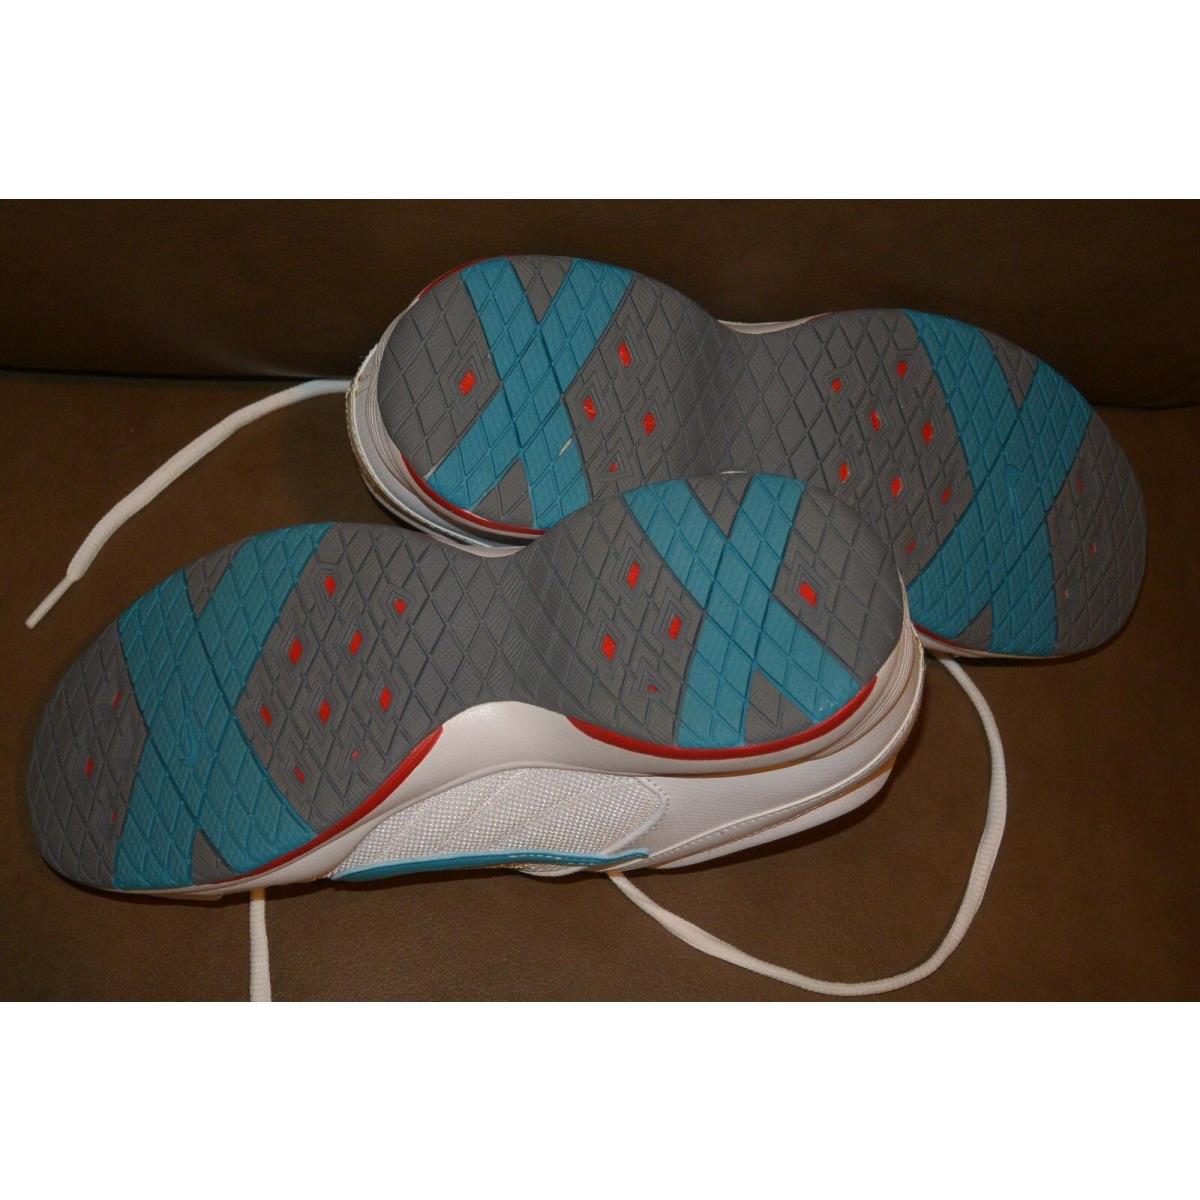 Nike shoes  - White, Blue, Red, Grey 5